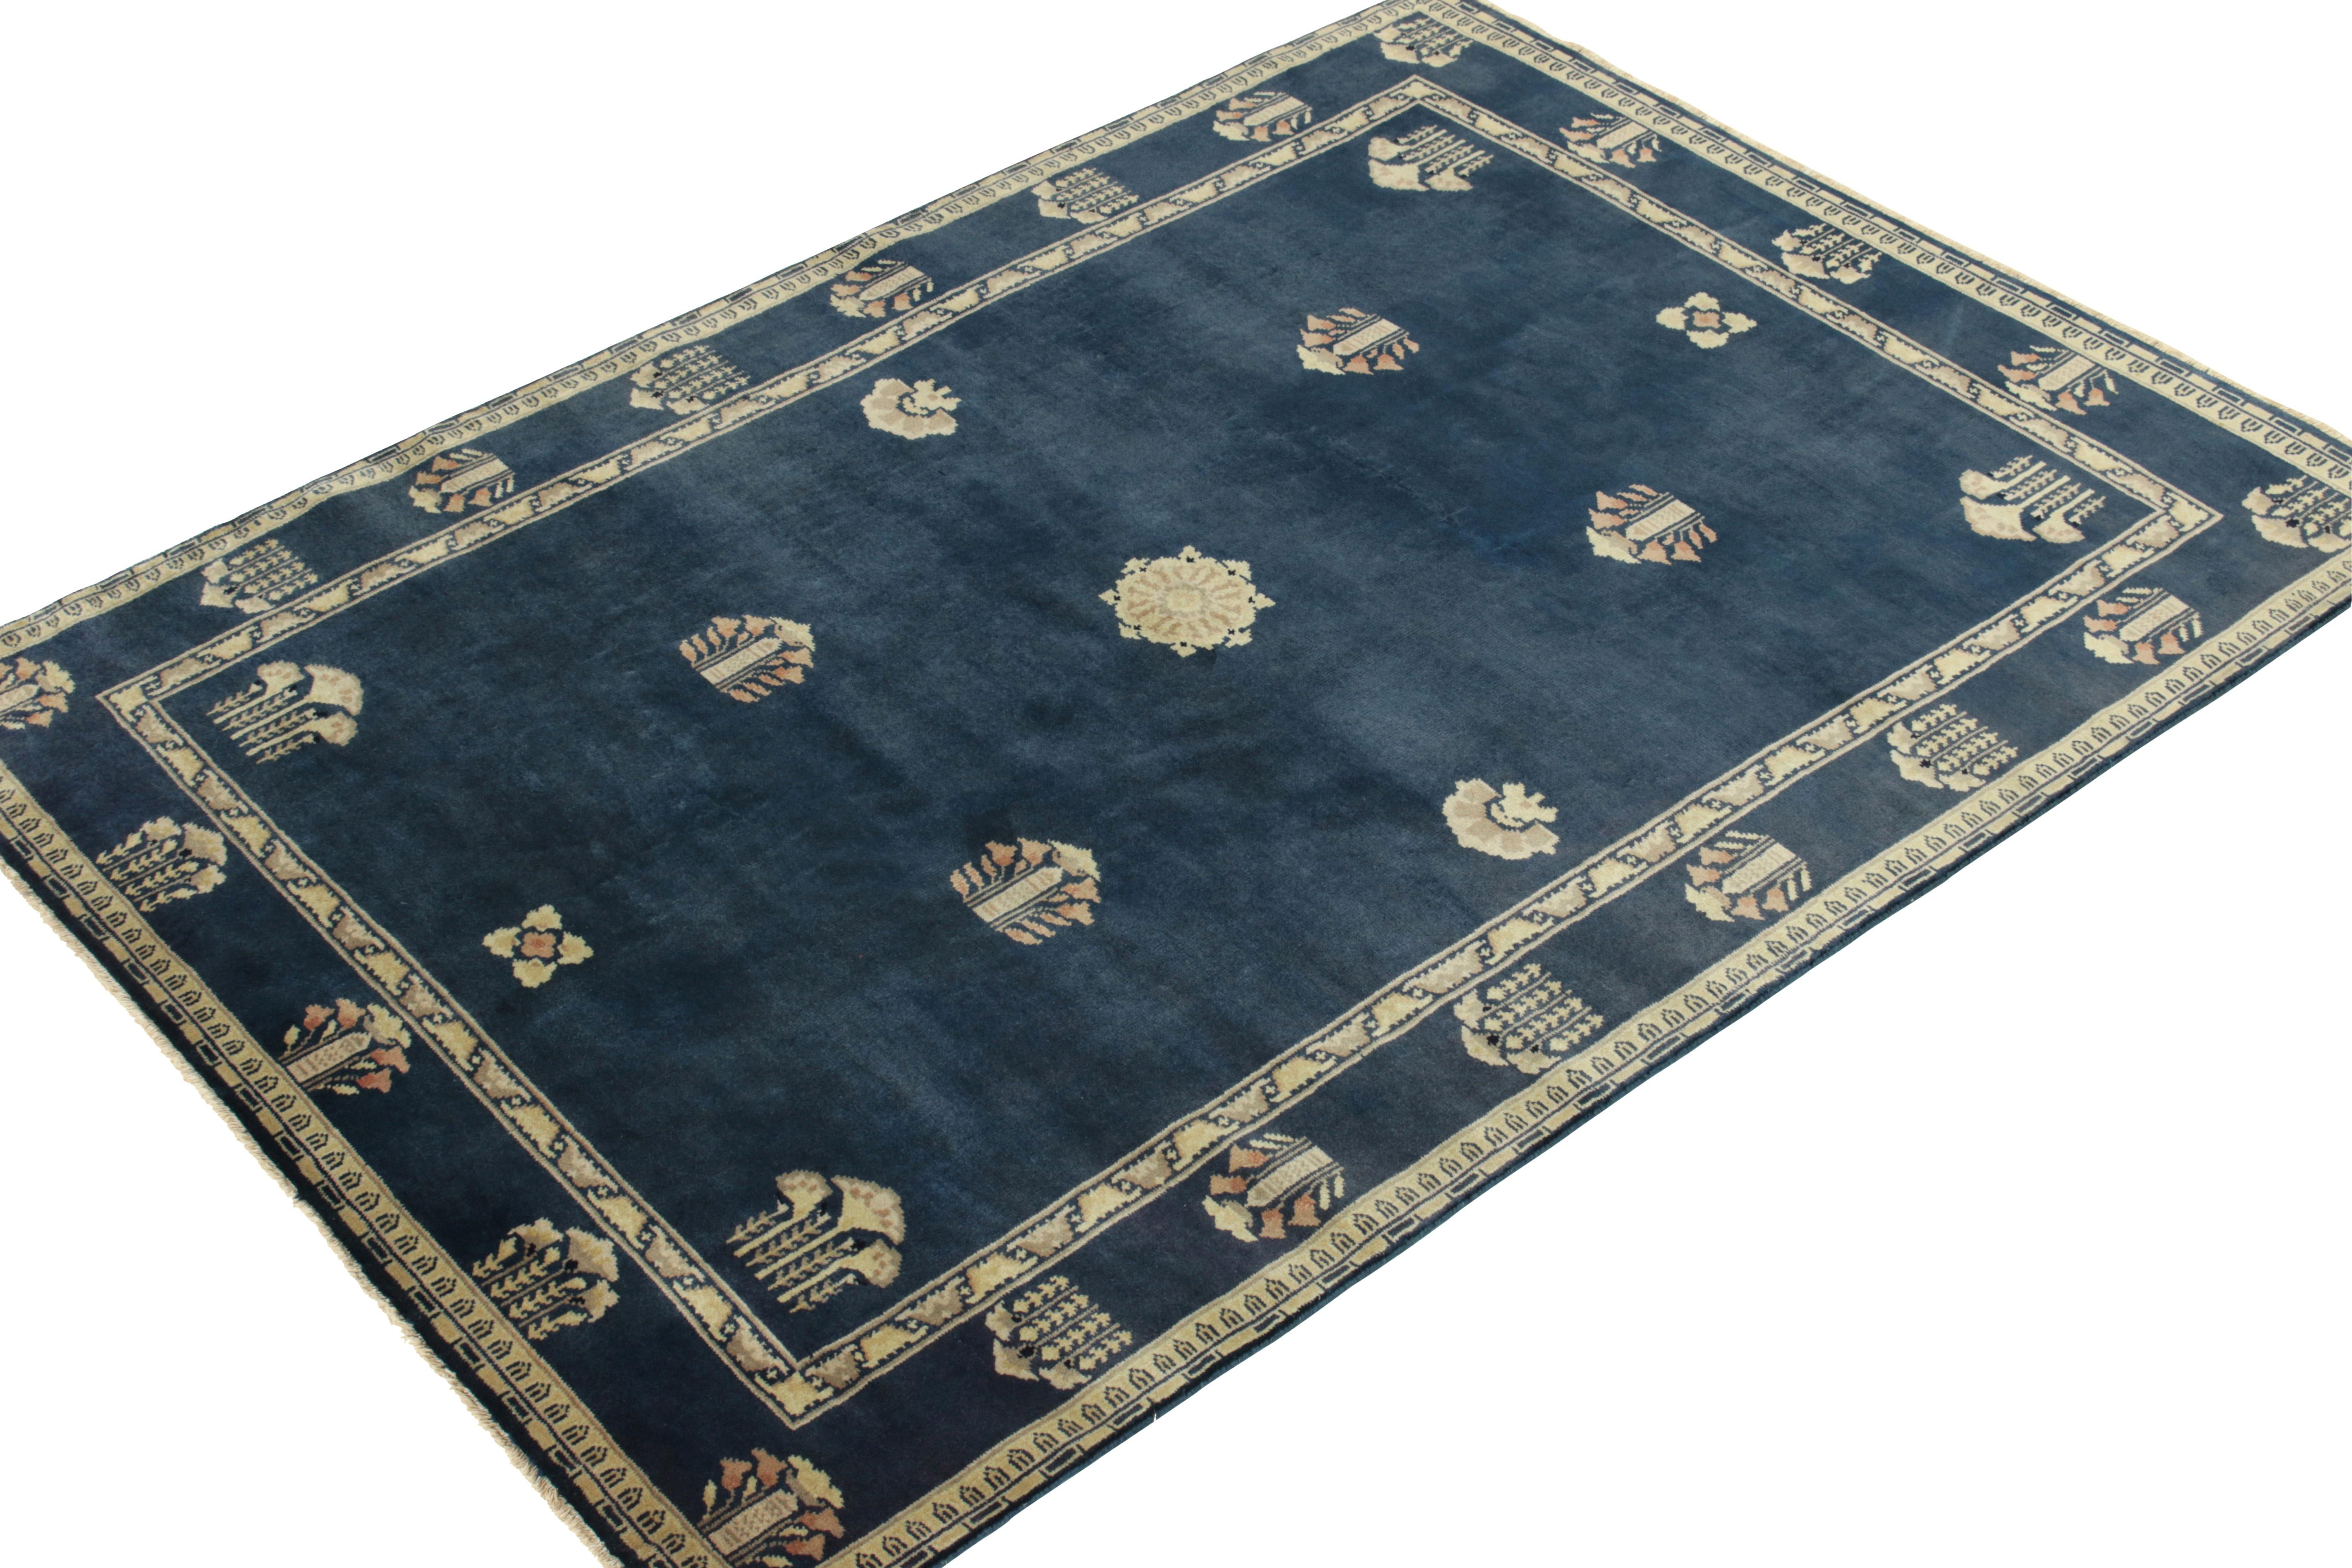 Art Deco Vintage Chinese Deco Style Rug in Blue & Grey Floral Patterns by Rug & Kilim For Sale